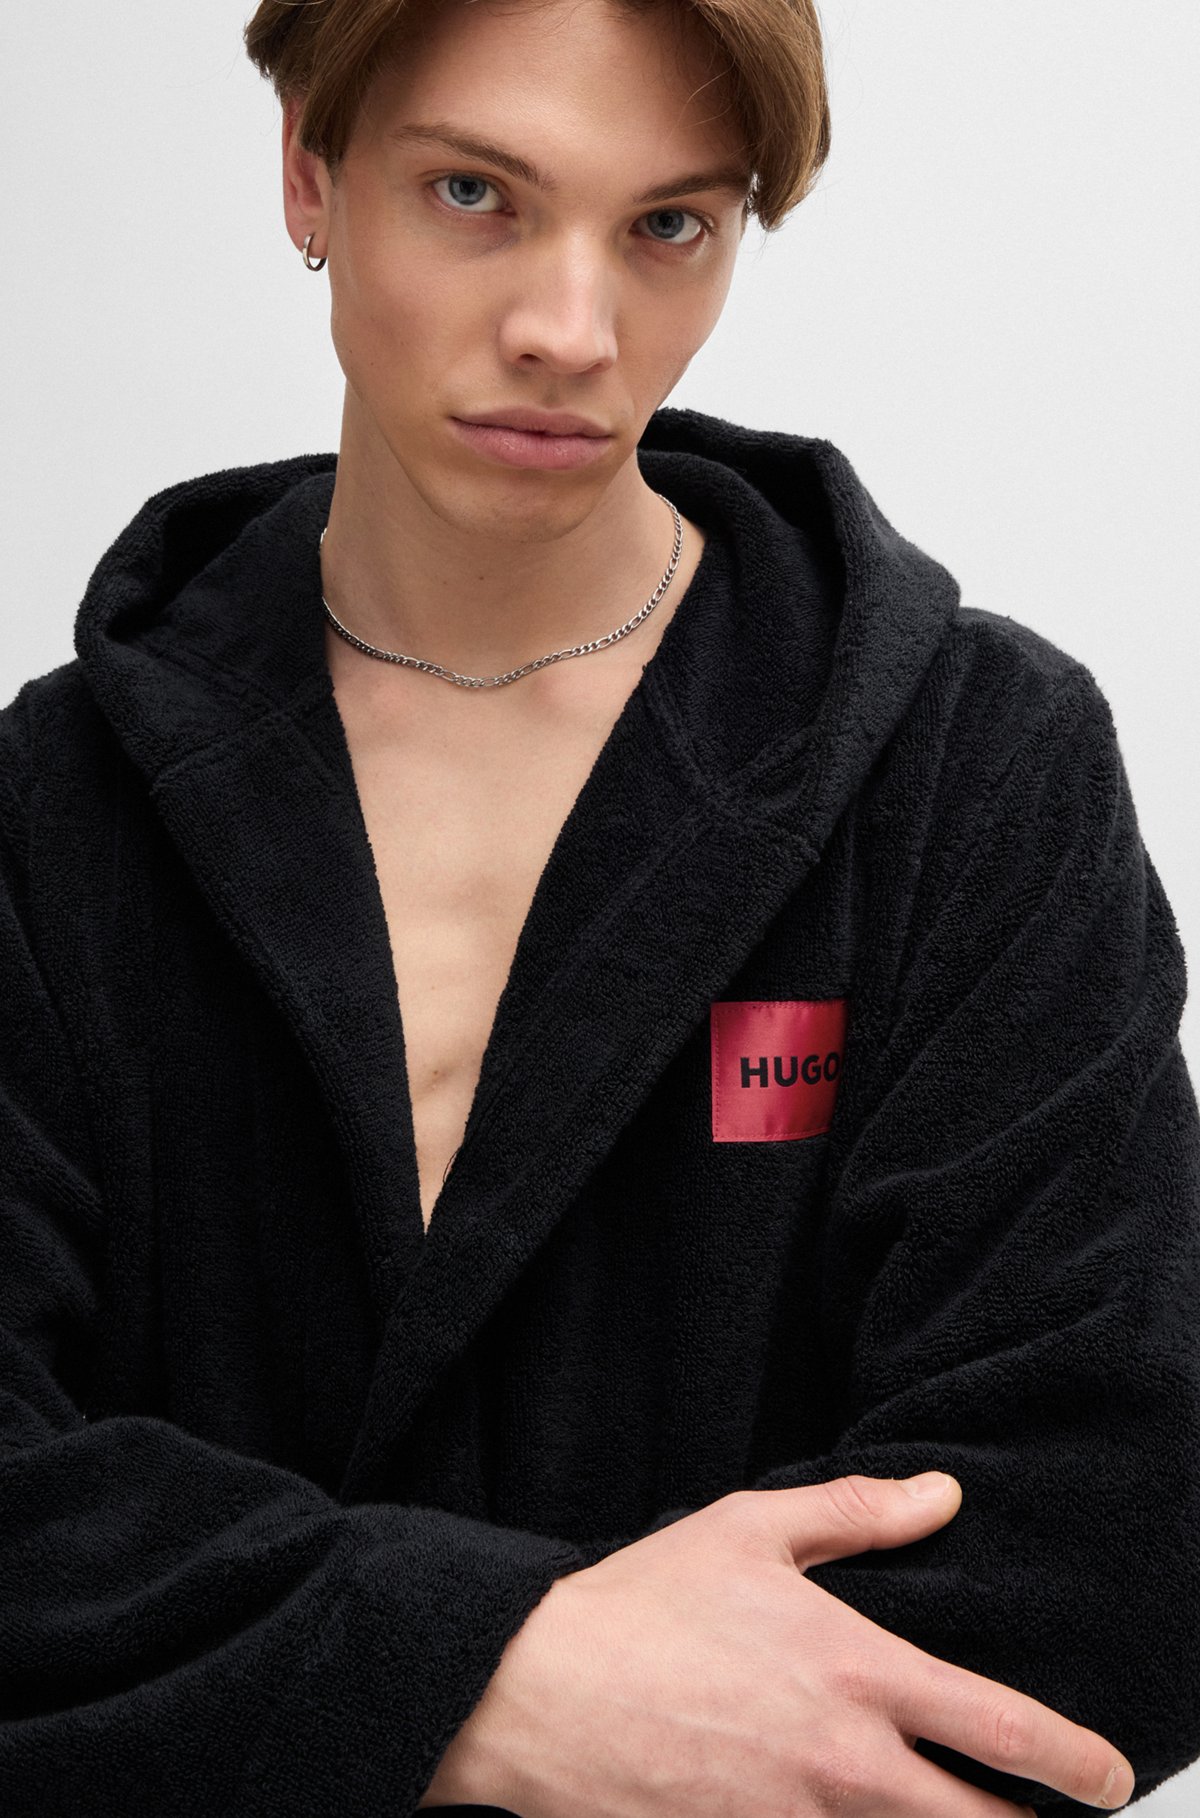 HUGO - Cotton-terry hooded dressing gown with red logo label